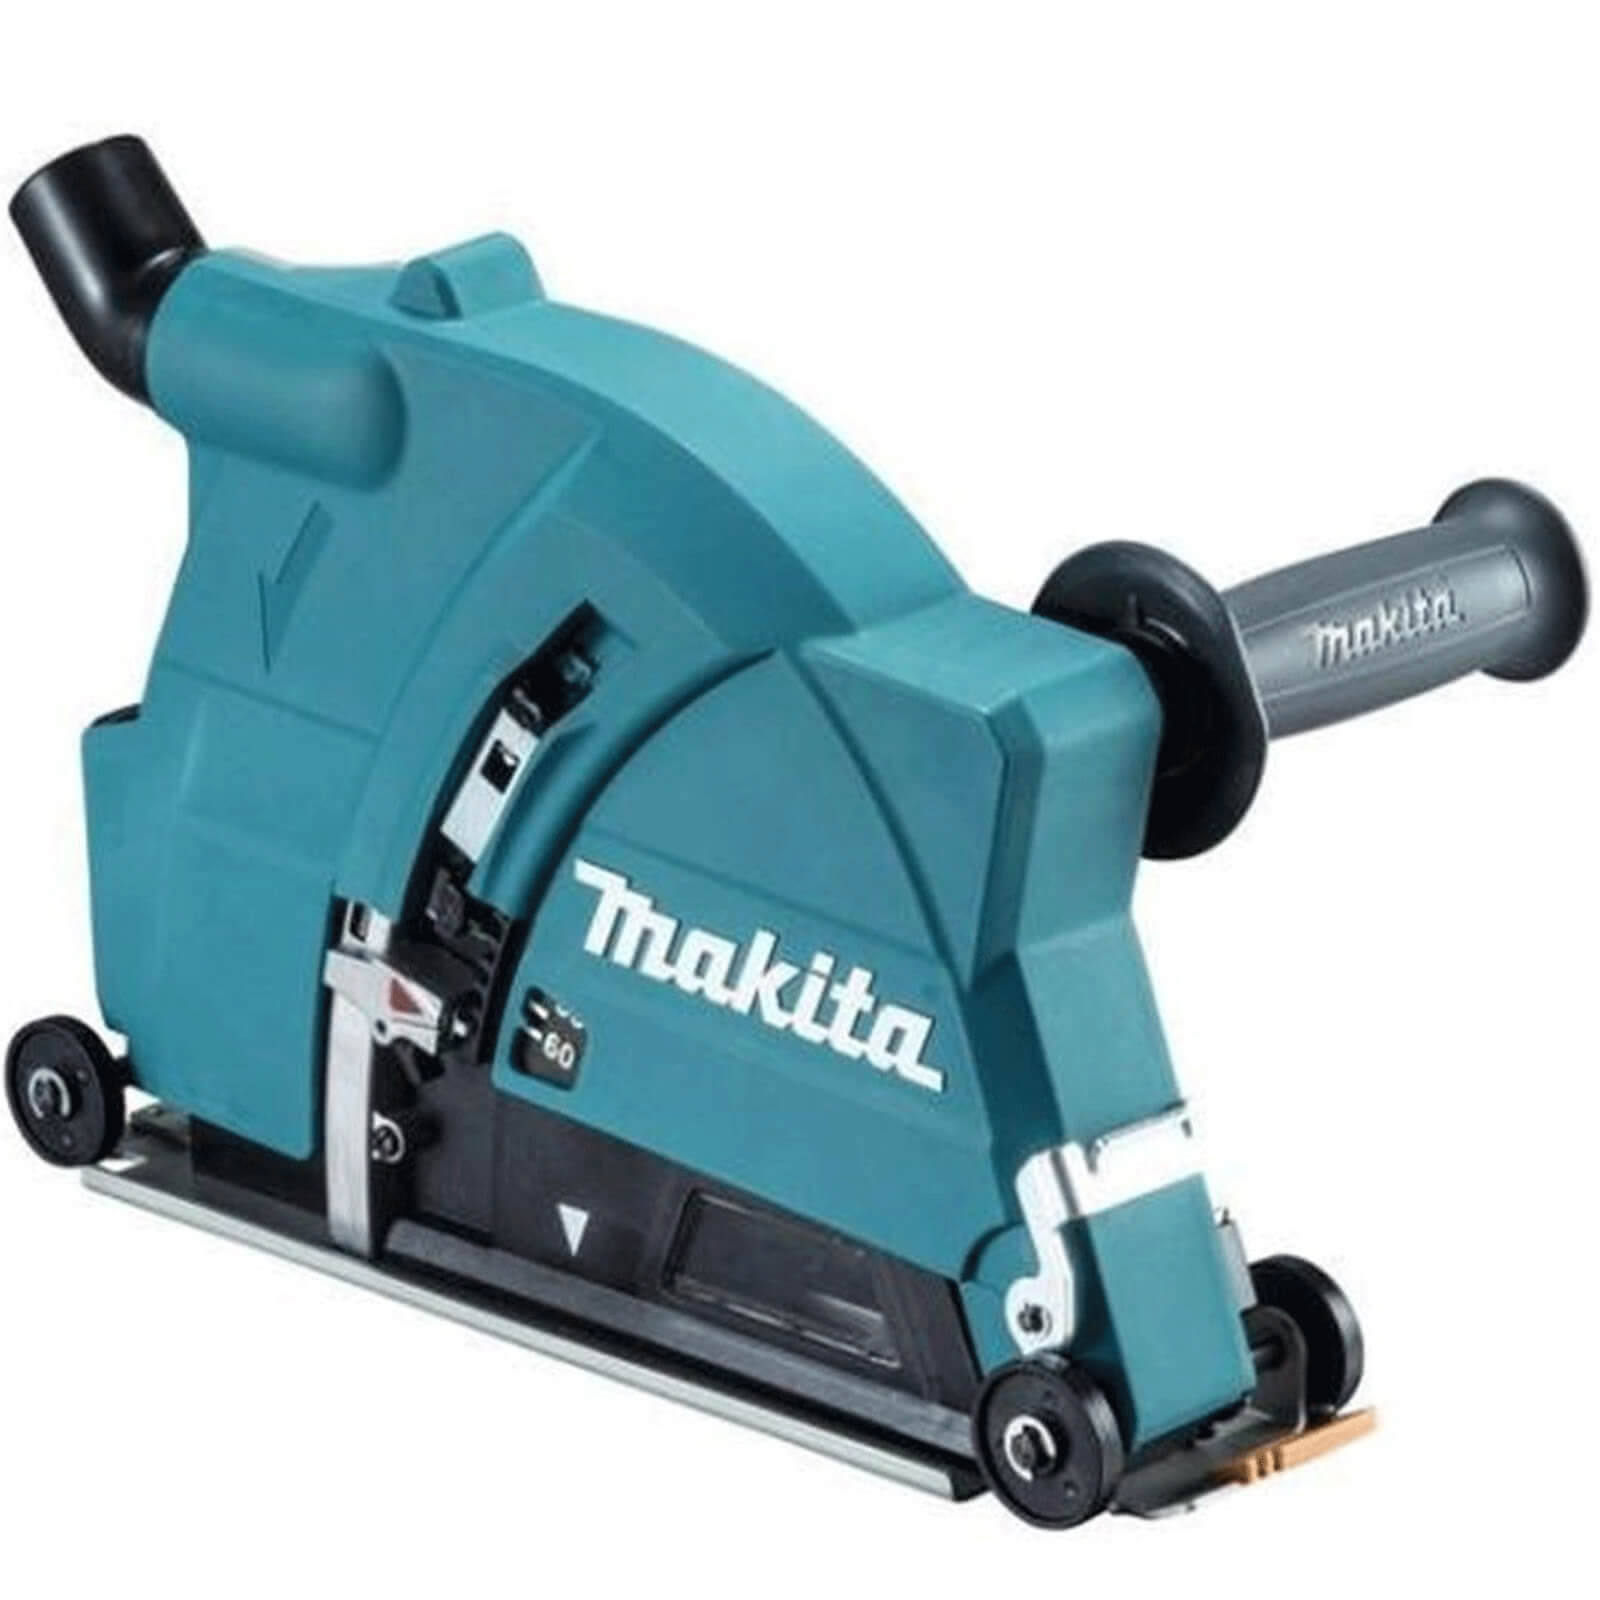 Image of Makita 198440-5 Angle Grinder Dust Collecting Wheel Guard Attachment